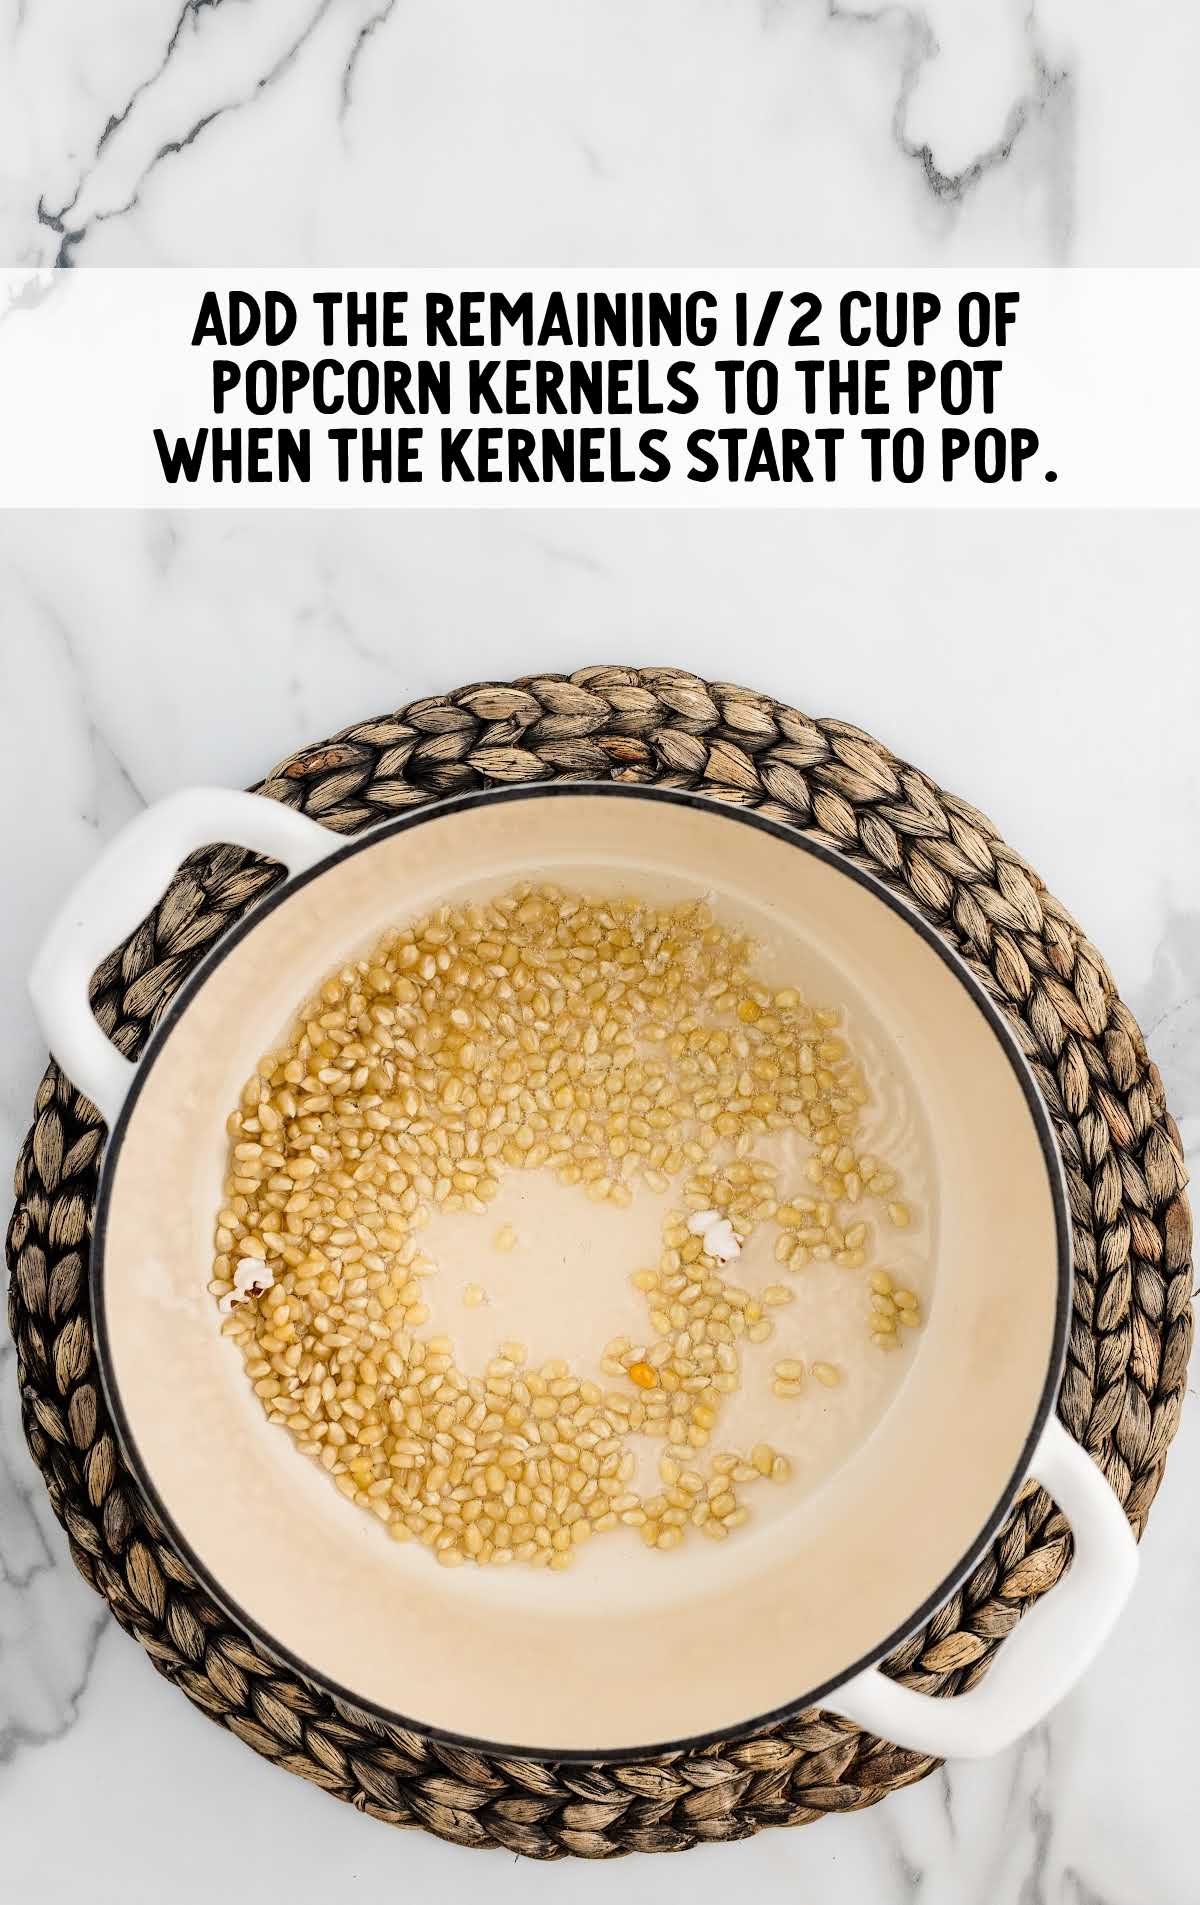 popcorn kernels added to the pot of oil